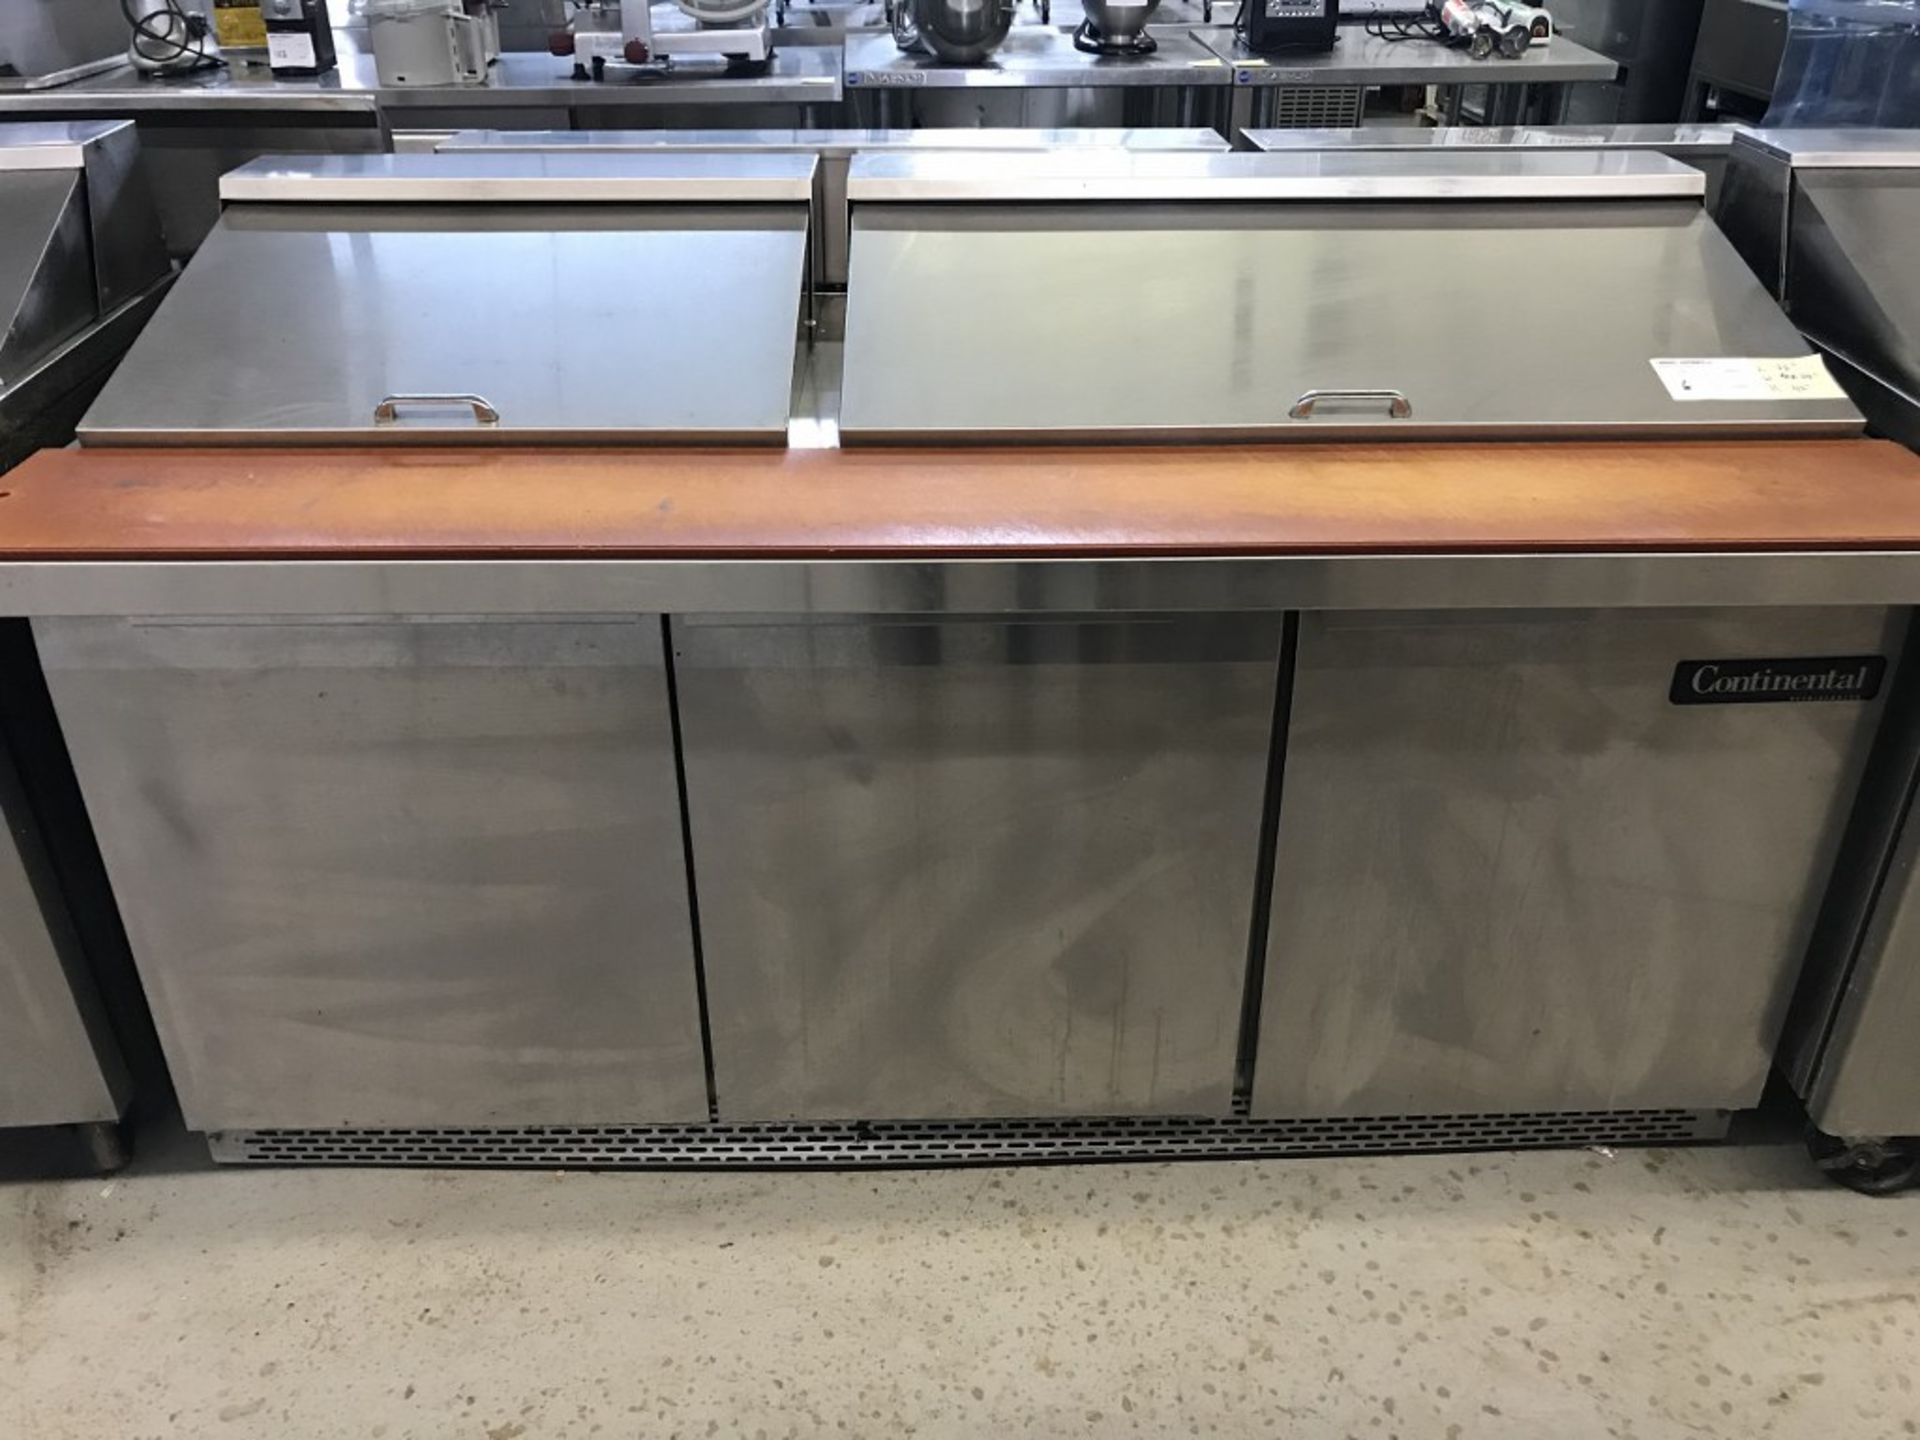 CONTINENTAL - 3-DOOR REFRIGERATED 72" MIGHTY TOP SALAD/SANDWICH PREP TABLE. MODEL # SW72-30M